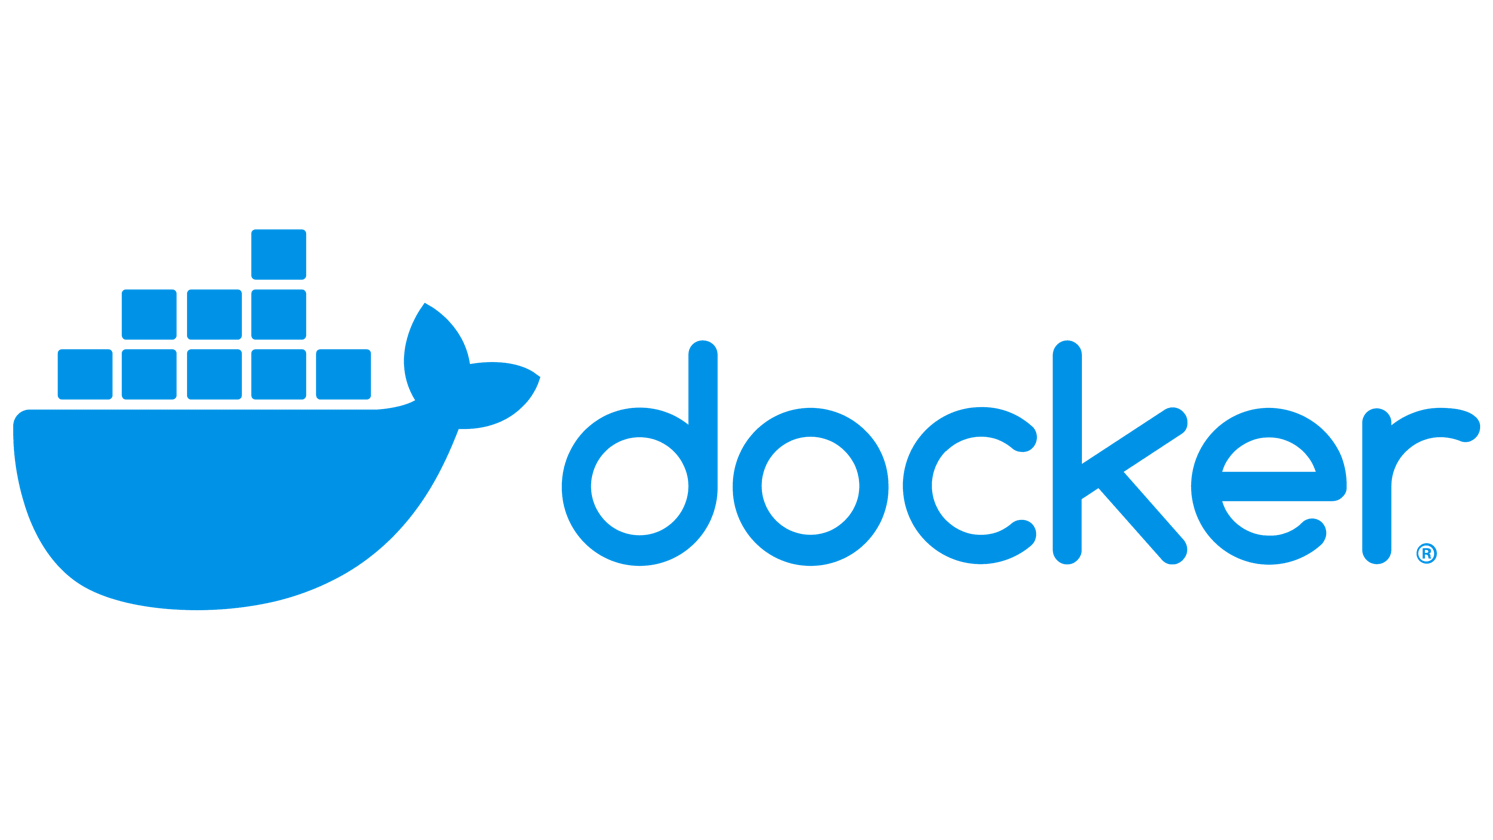 Understanding Containers and Images in Docker